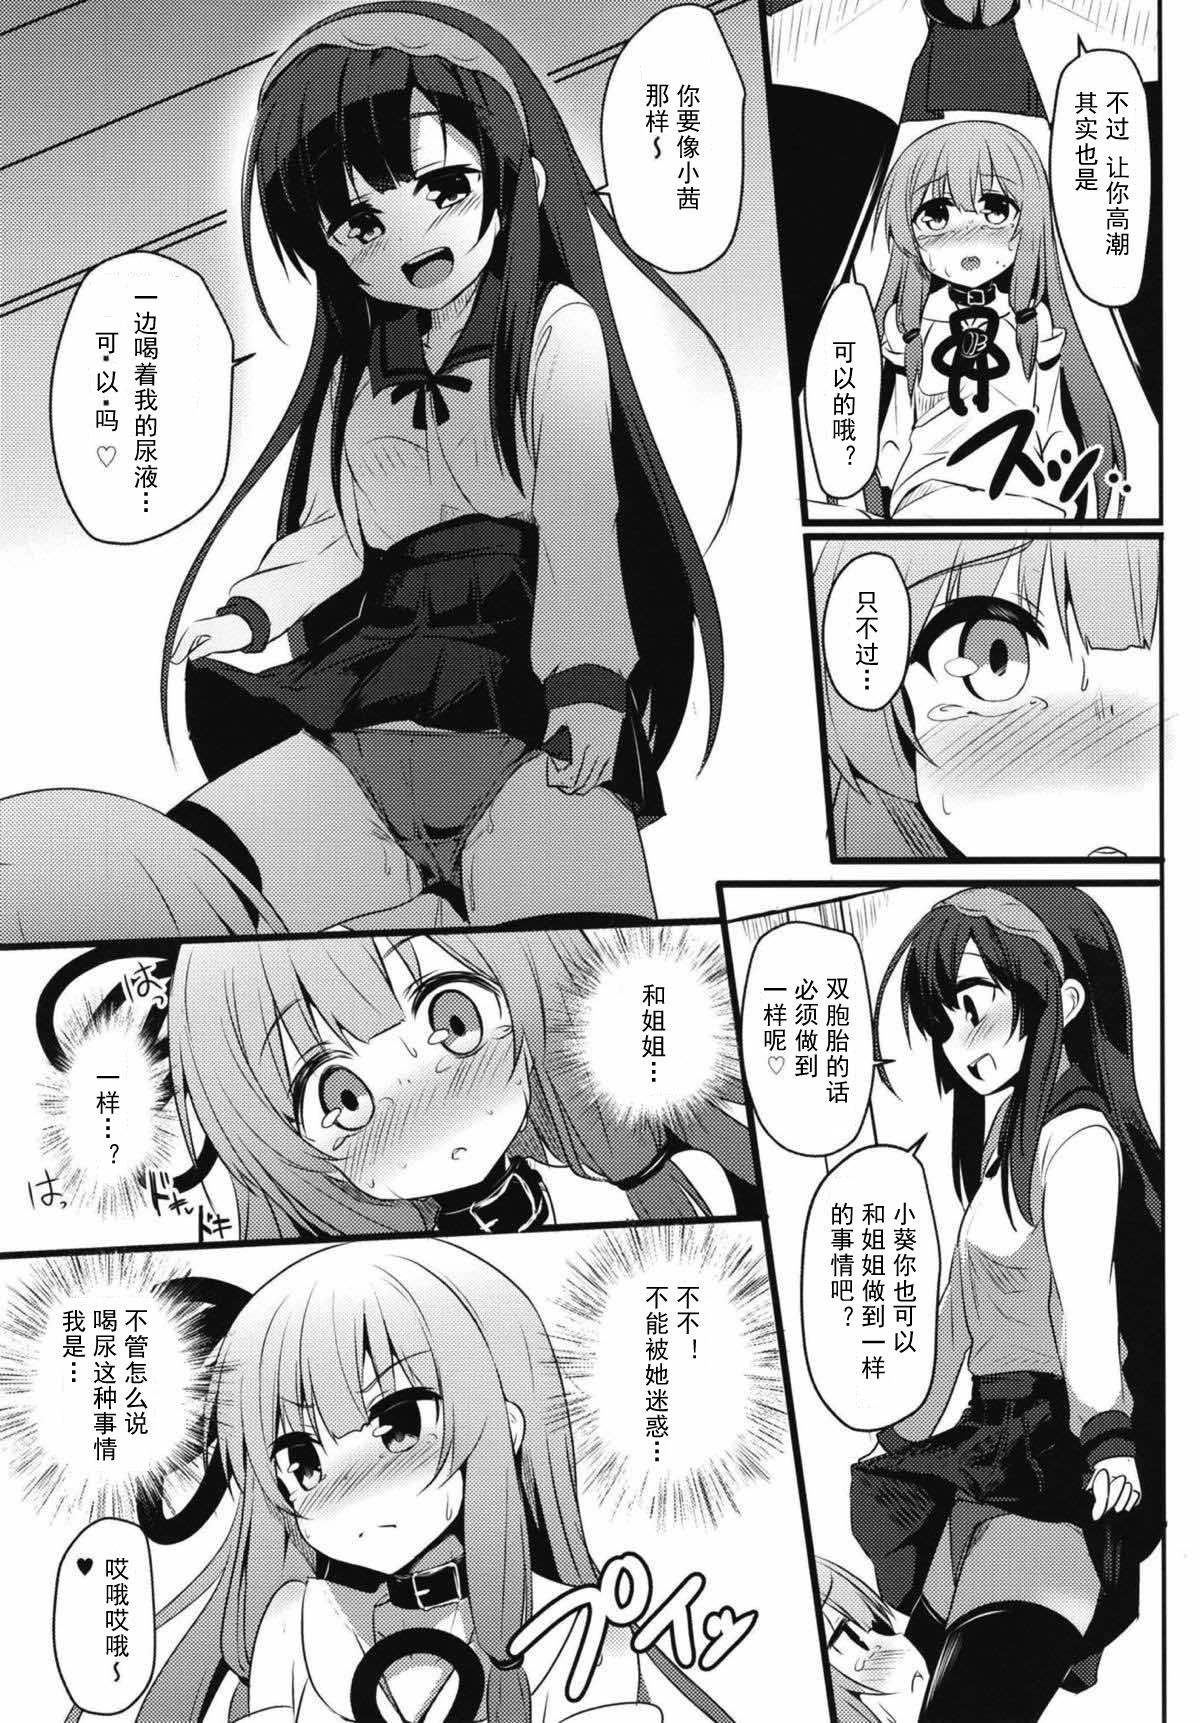 Bj (Kotonoha's Festa 2) [Milk Pudding (Jamcy)] Akane-chan Challenge! 2.5-kaime (VOICEROID) [Chinese] [古早个人汉化] - Voiceroid Freaky - Page 11